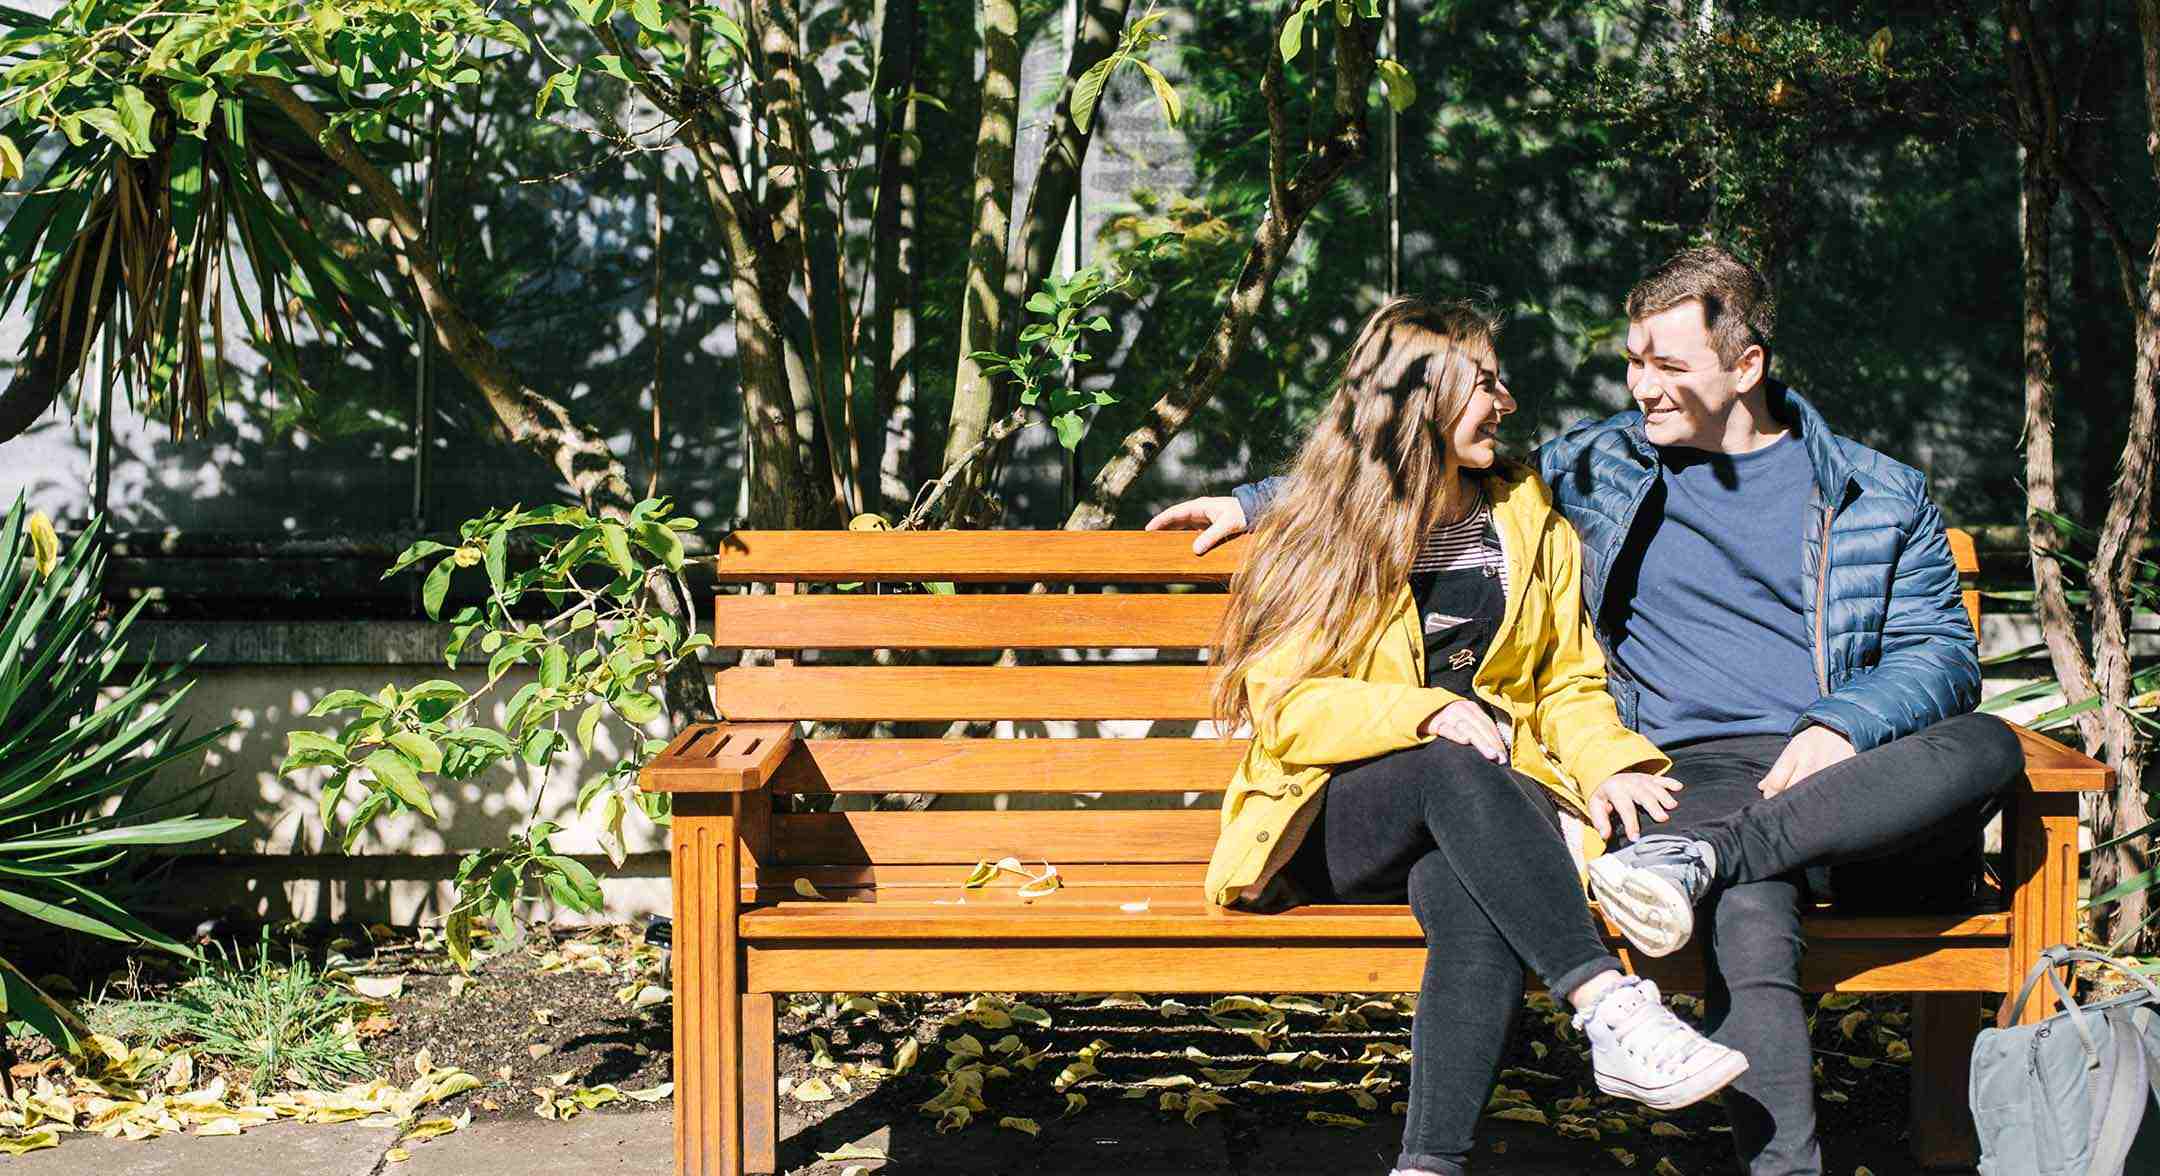 Boy and girl sitting on a bench in the sunshine